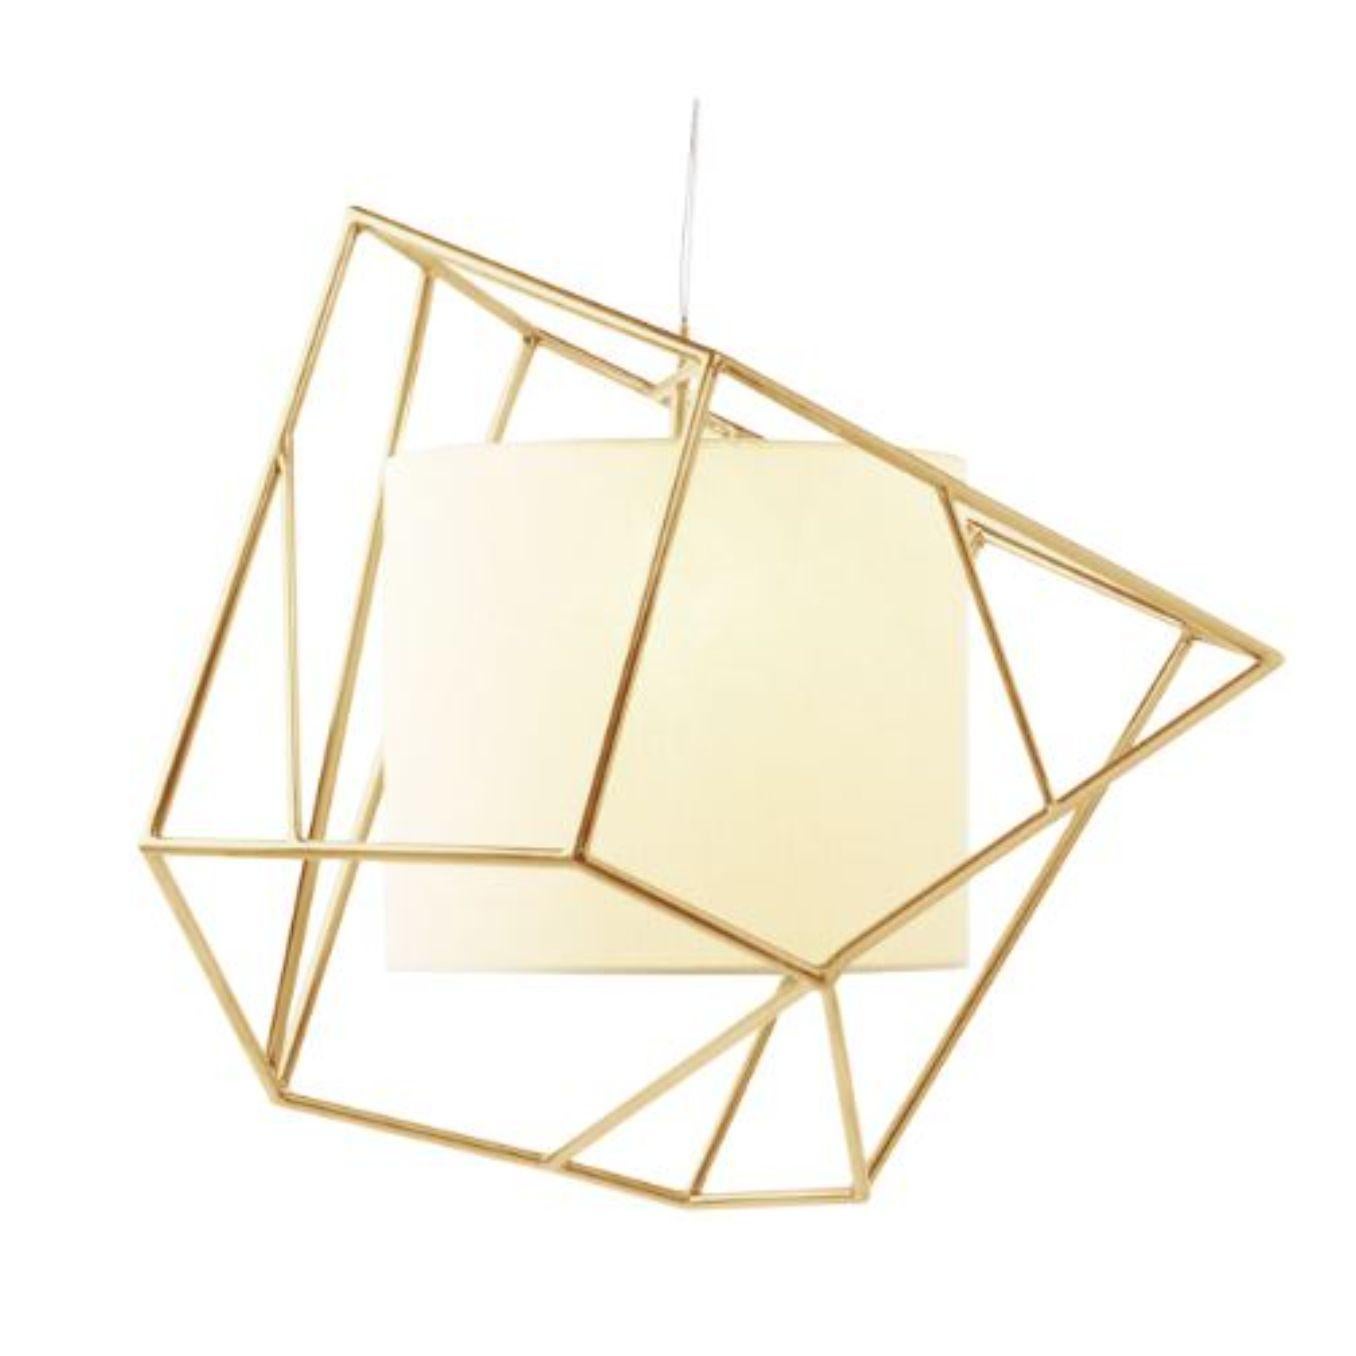 Brass star I suspension lamp by Dooq
Dimensions: W 60 x D 60 x H 50 cm
Materials: lacquered metal, polished or satin metal, brass.
Also available in different colors and materials.

Information:
230V/50Hz
E27/1x20W LED
120V/60Hz
E26/1x15W